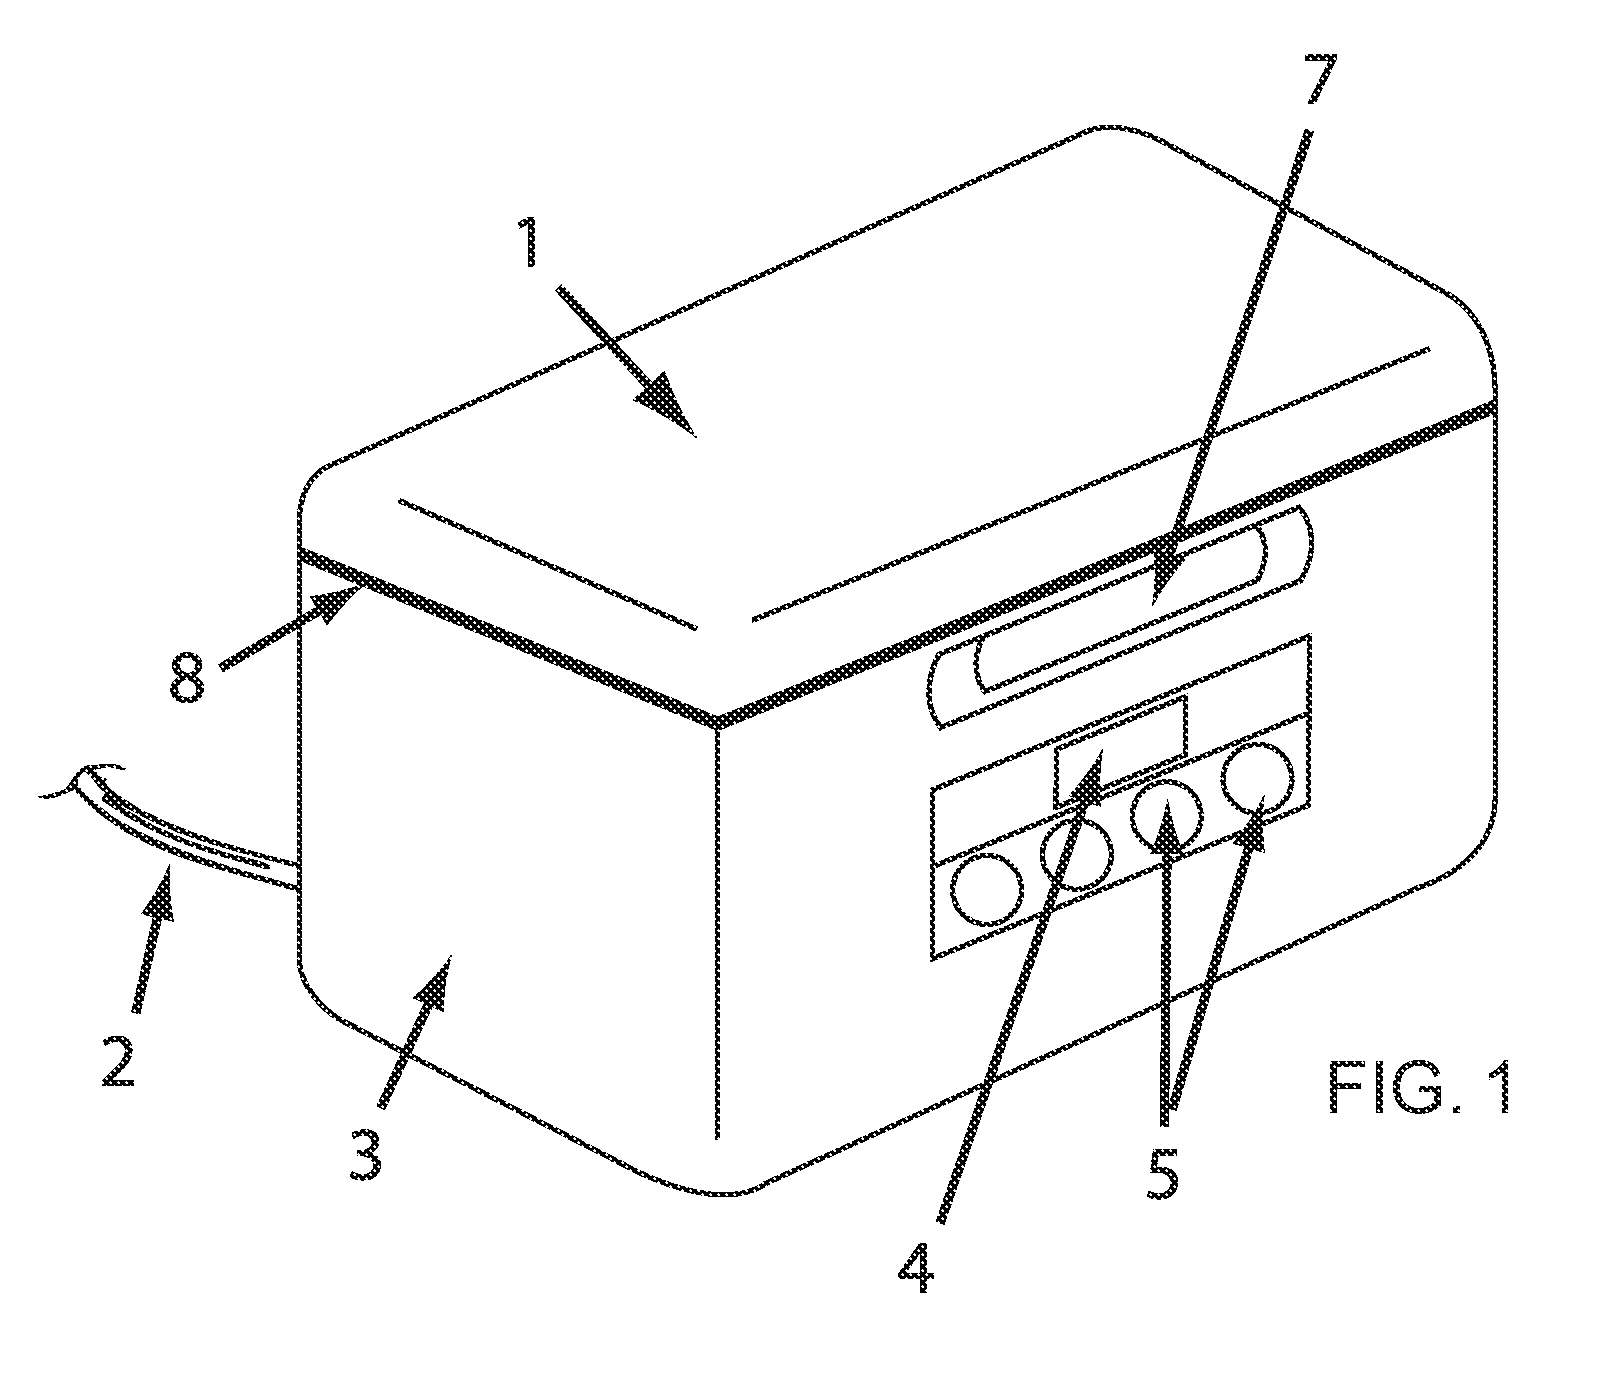 Storage and/or heating system/apparatus for items and food